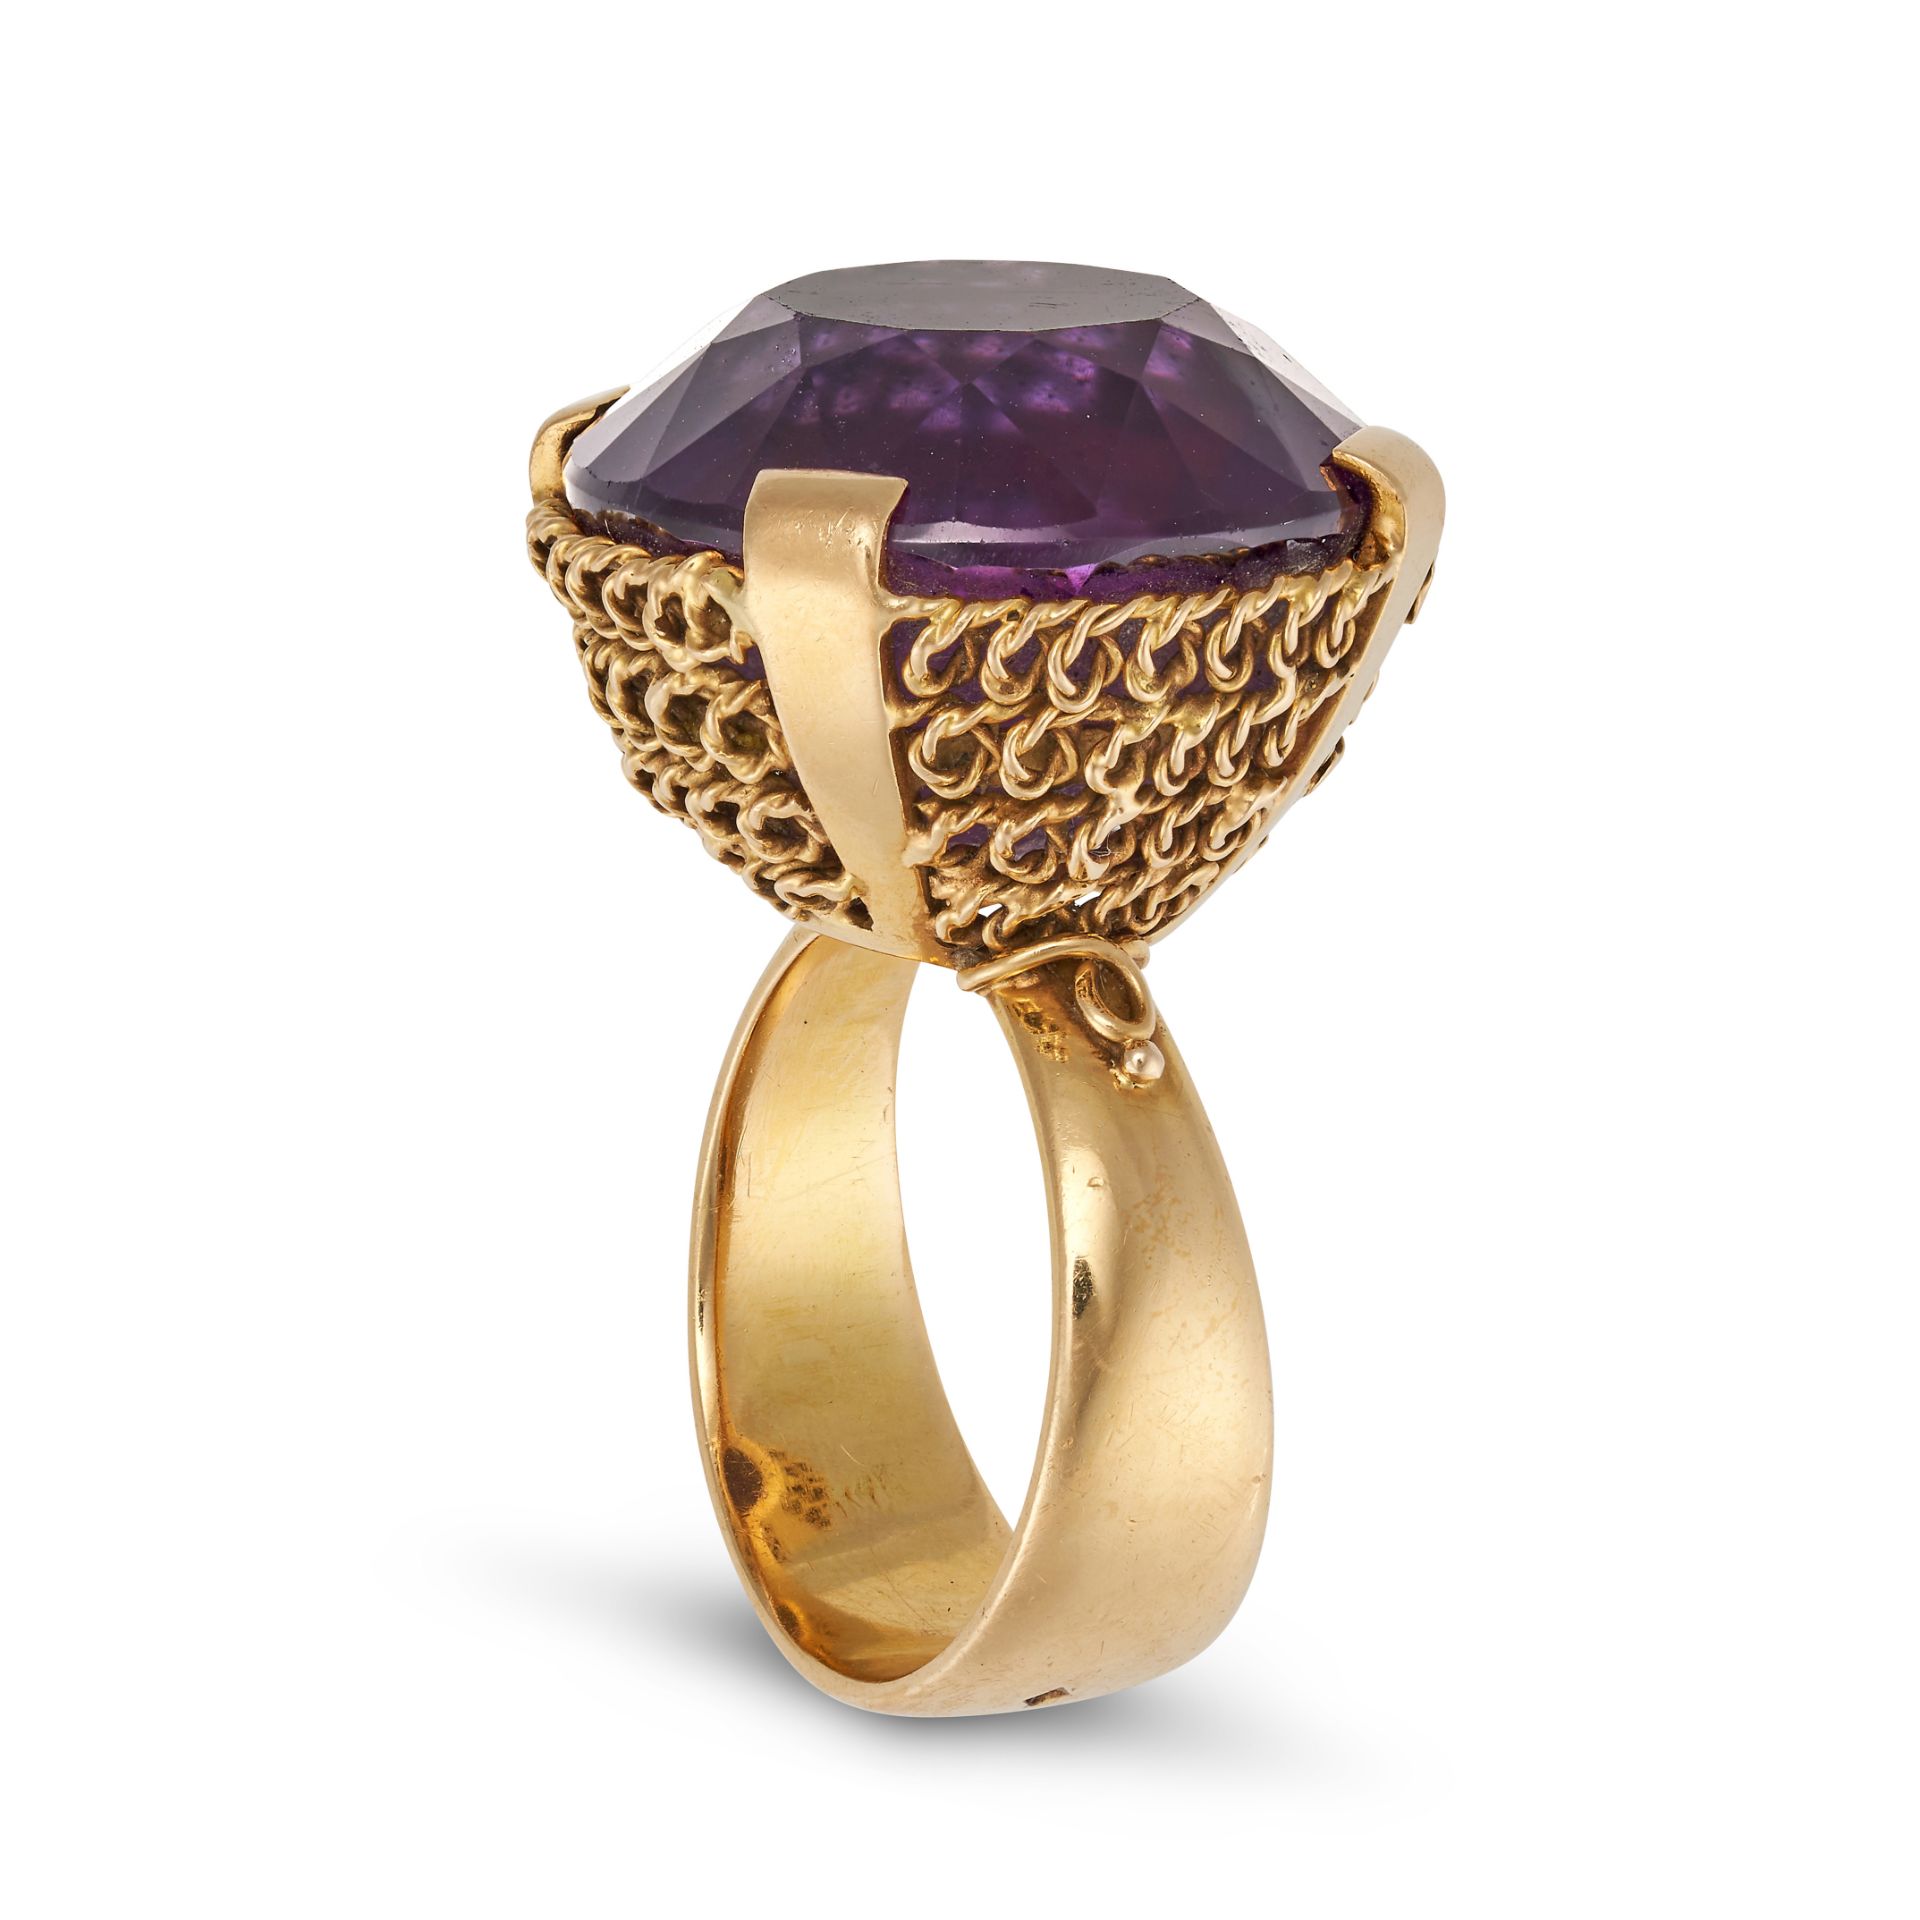 LUCIENNE LAZON, A VINTAGE AMETHYST COCKTAIL RING in 18ct yellow gold, set with a round cut amethy...